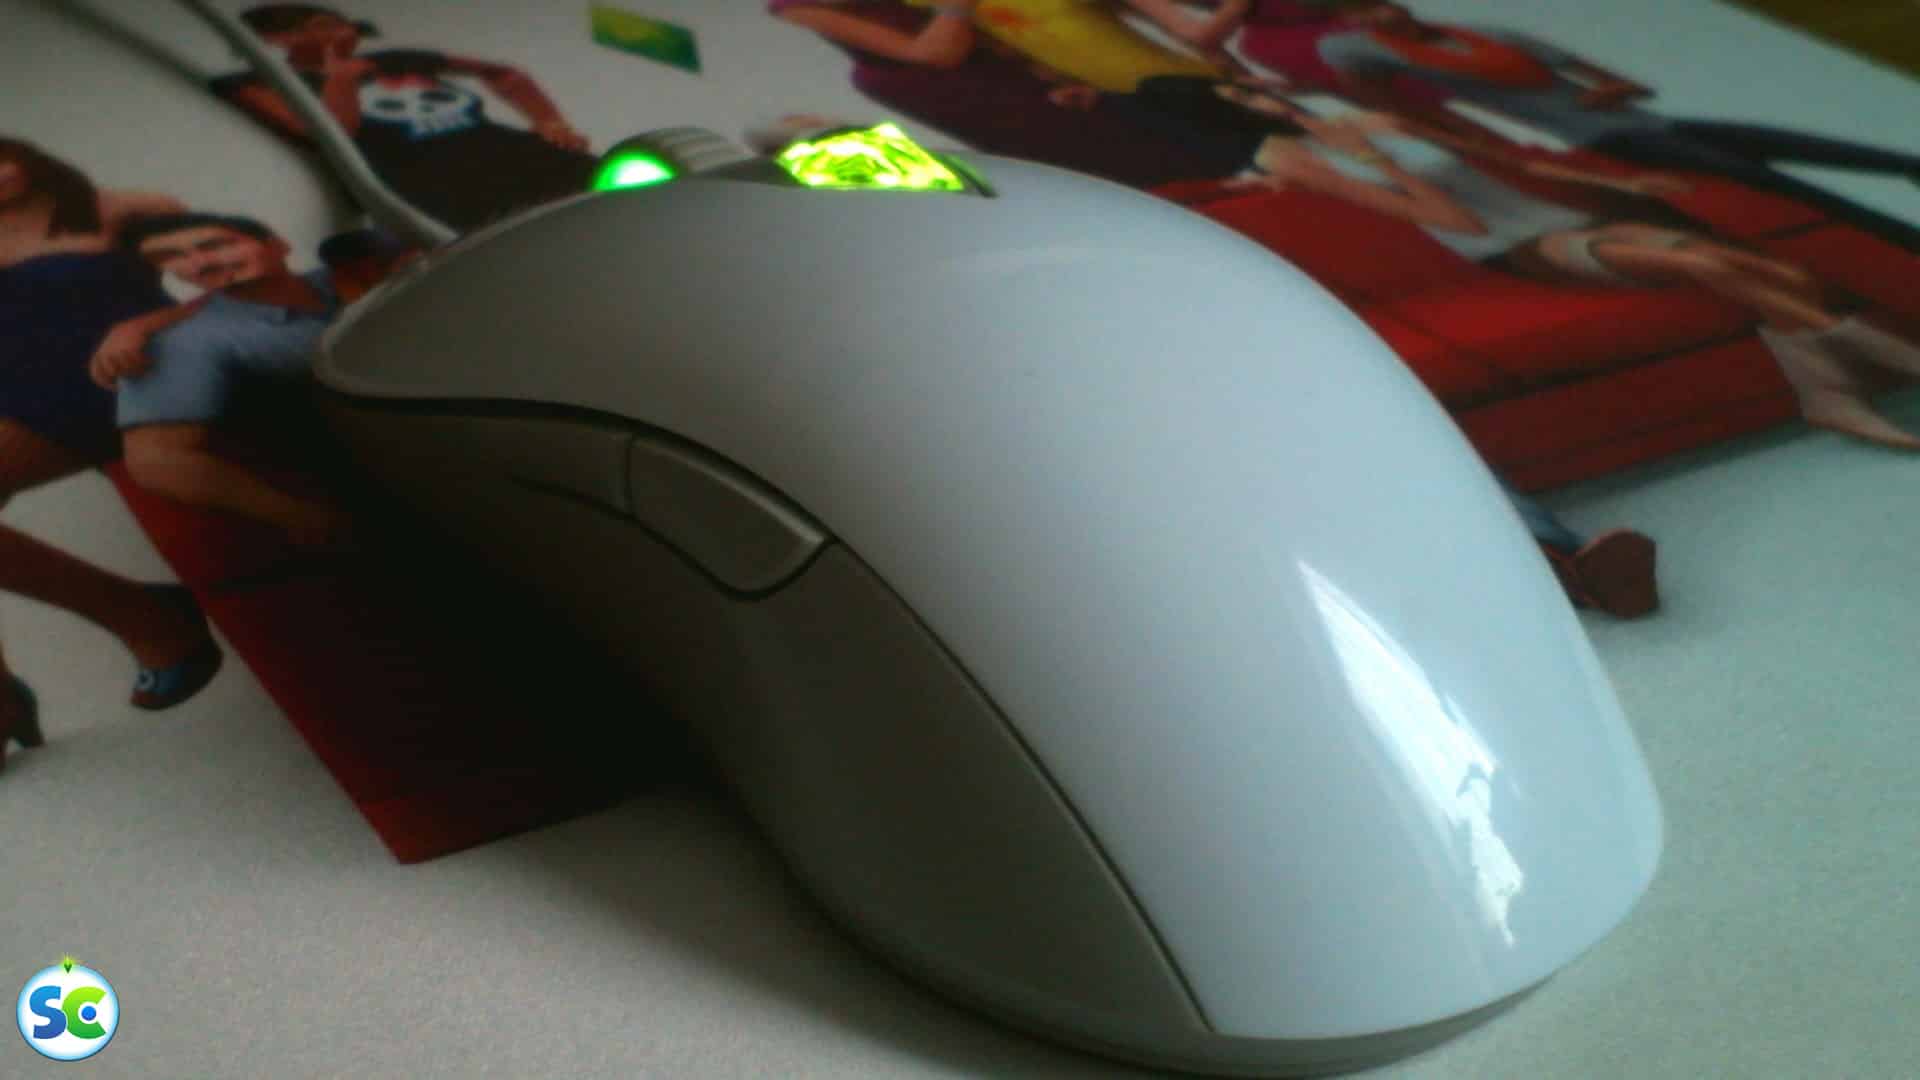 Detail Steelseries Sims 4 Mouse Nomer 13